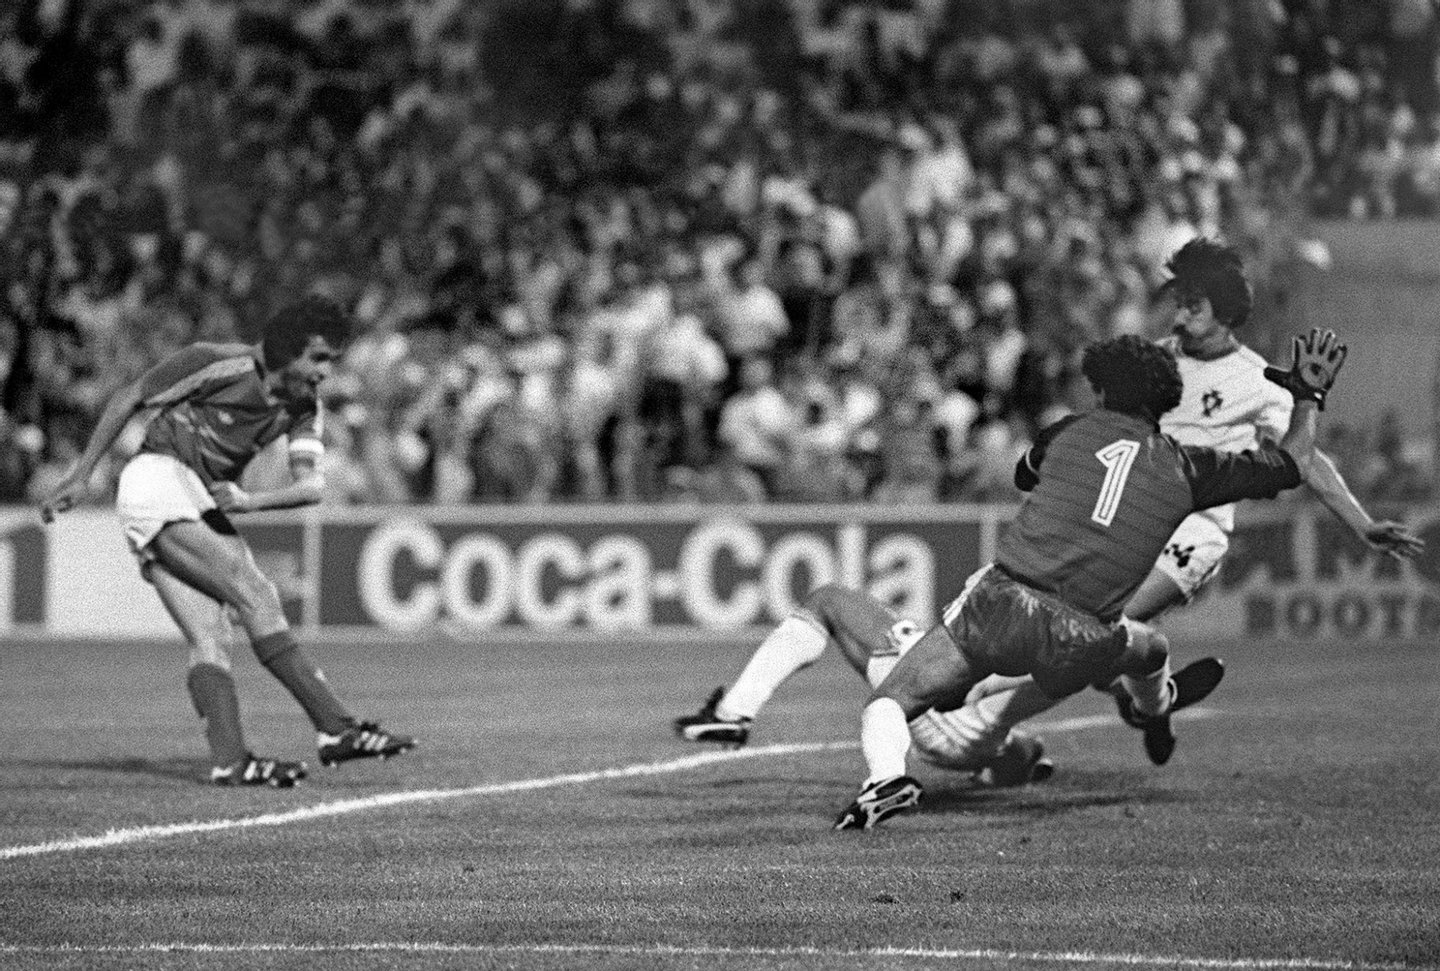 MARSEILLE, FRANCE - JUNE 23: French captain and midfielder Michel Platini scores the winning goal in extra time as Portuguese goalkeeper Bento (1) and defender Frasco dive in vain during the European Nations soccer championship semi-final match between France and Portugal, 23 June 1984 in Marseille. France beat Portugal 3-2. (Photo credit should read STAFF/AFP/Getty Images)